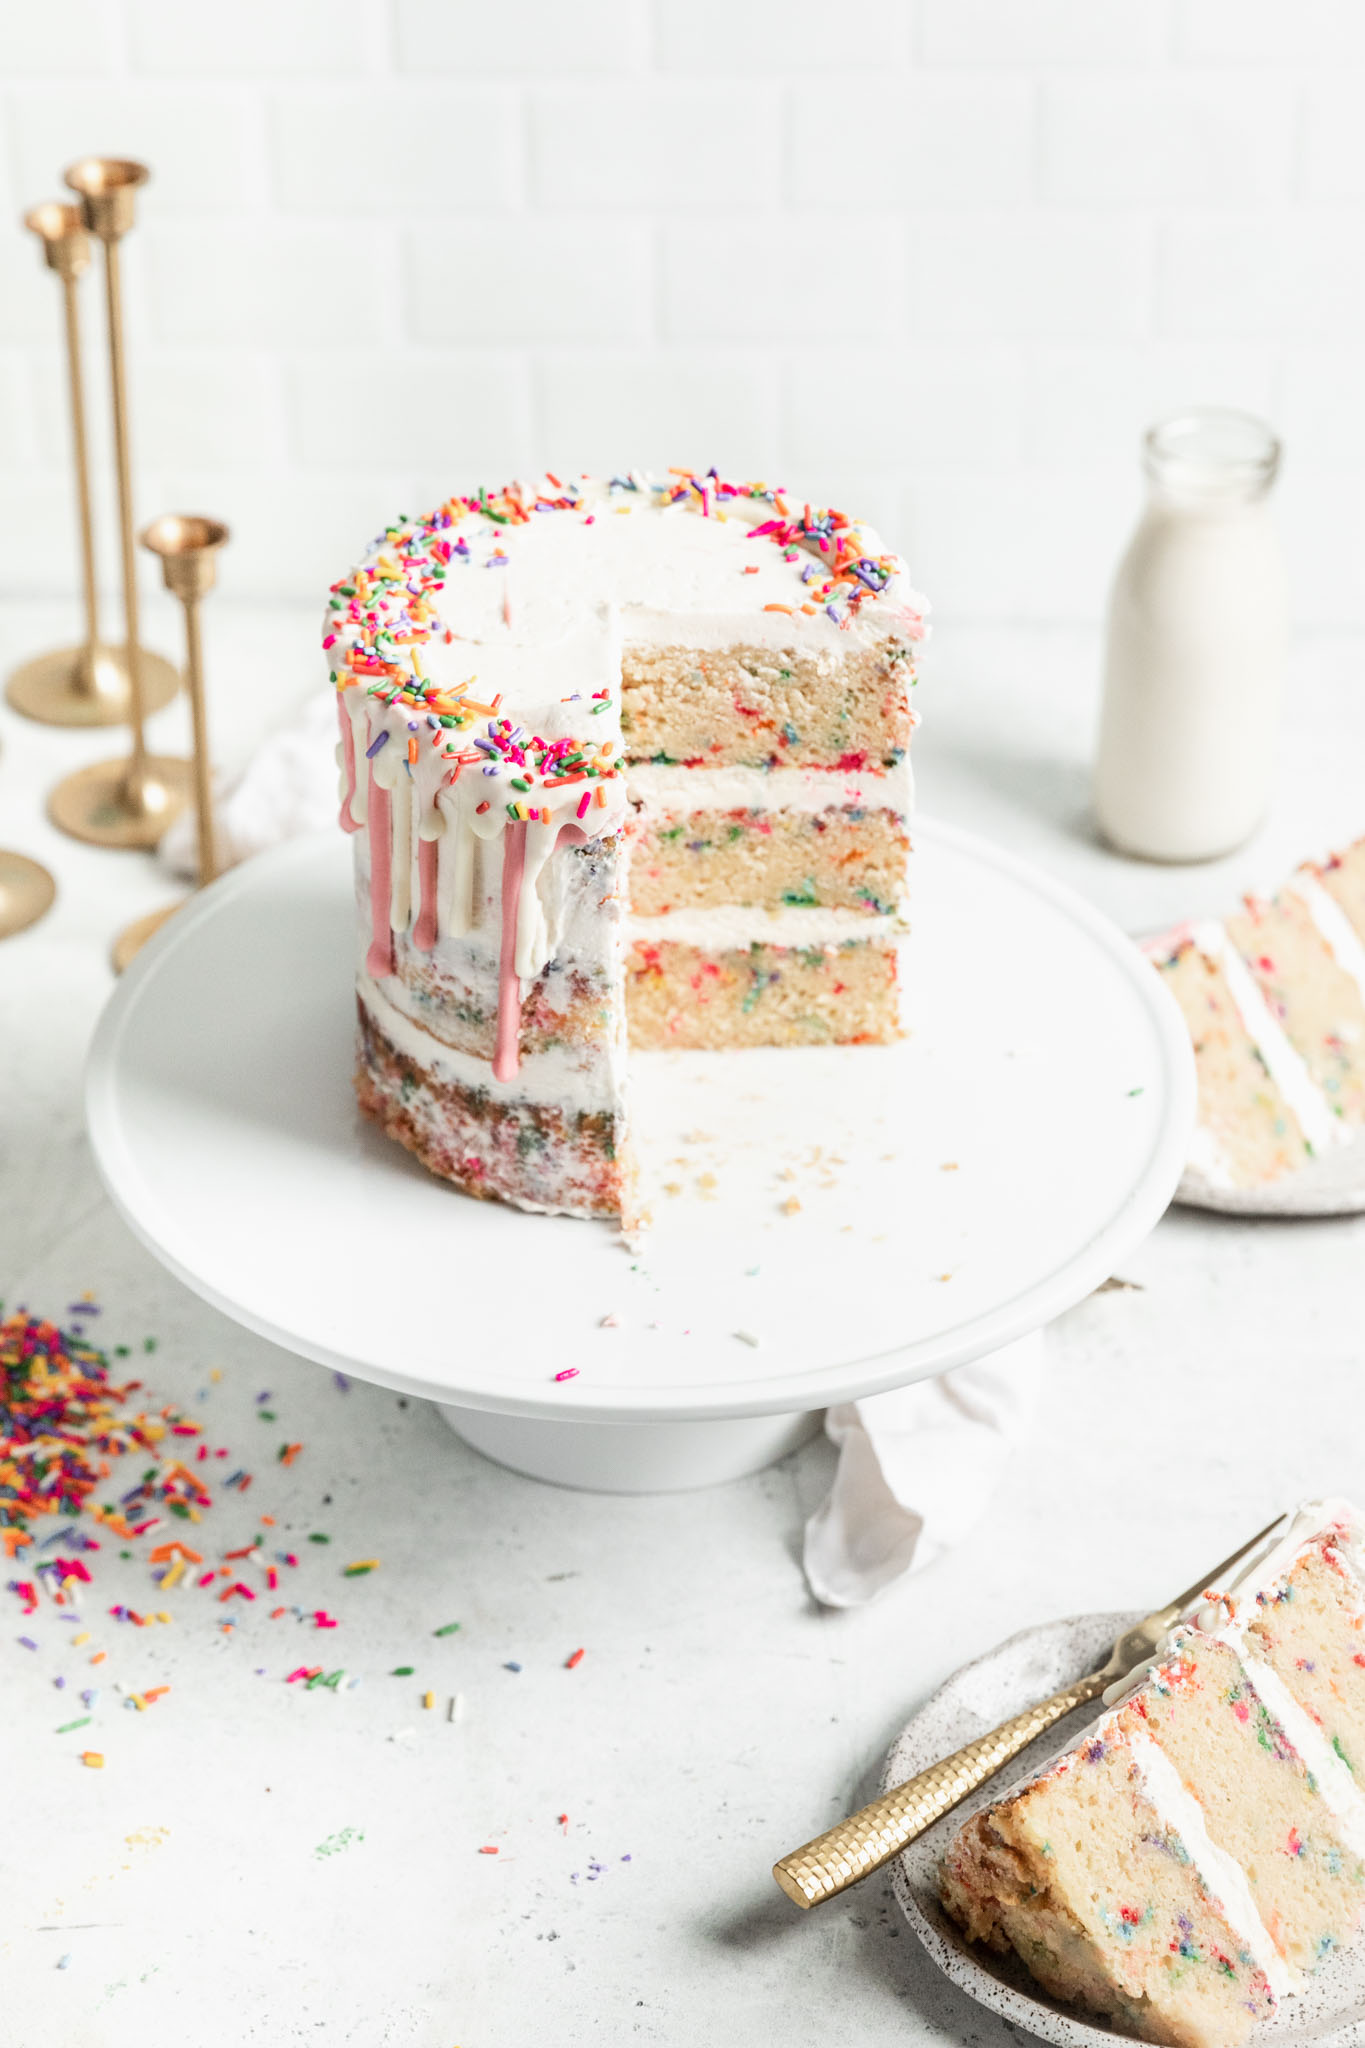 The best homemade funfetti cake recipe! Tastes even better than the pillsbury cake mix and makes the perfect birthday cake.